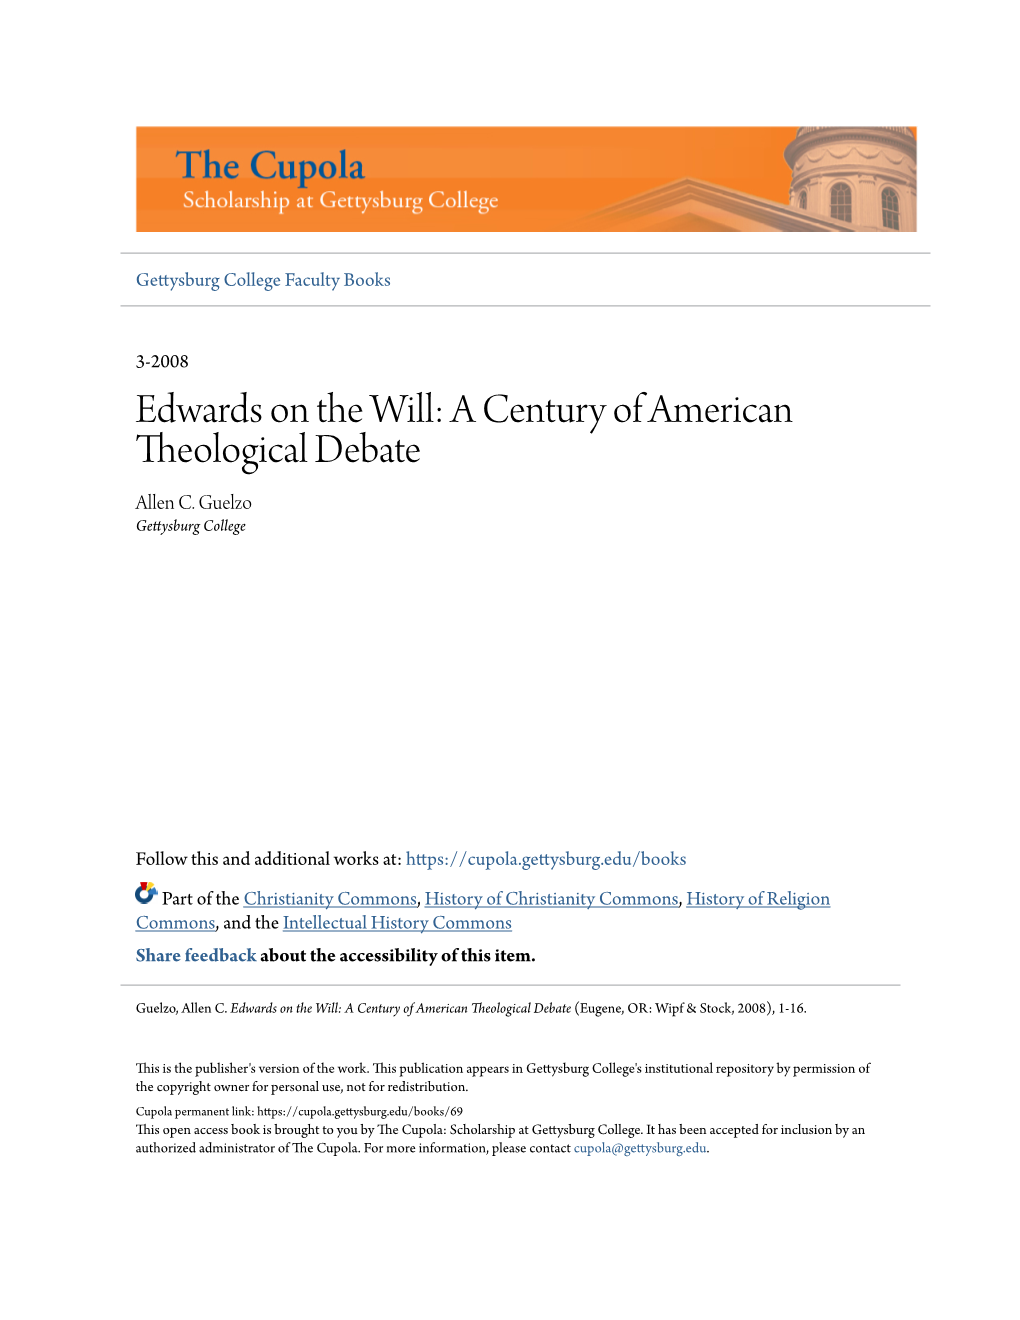 Edwards on the Will: a Century of American Theological Debate Allen C